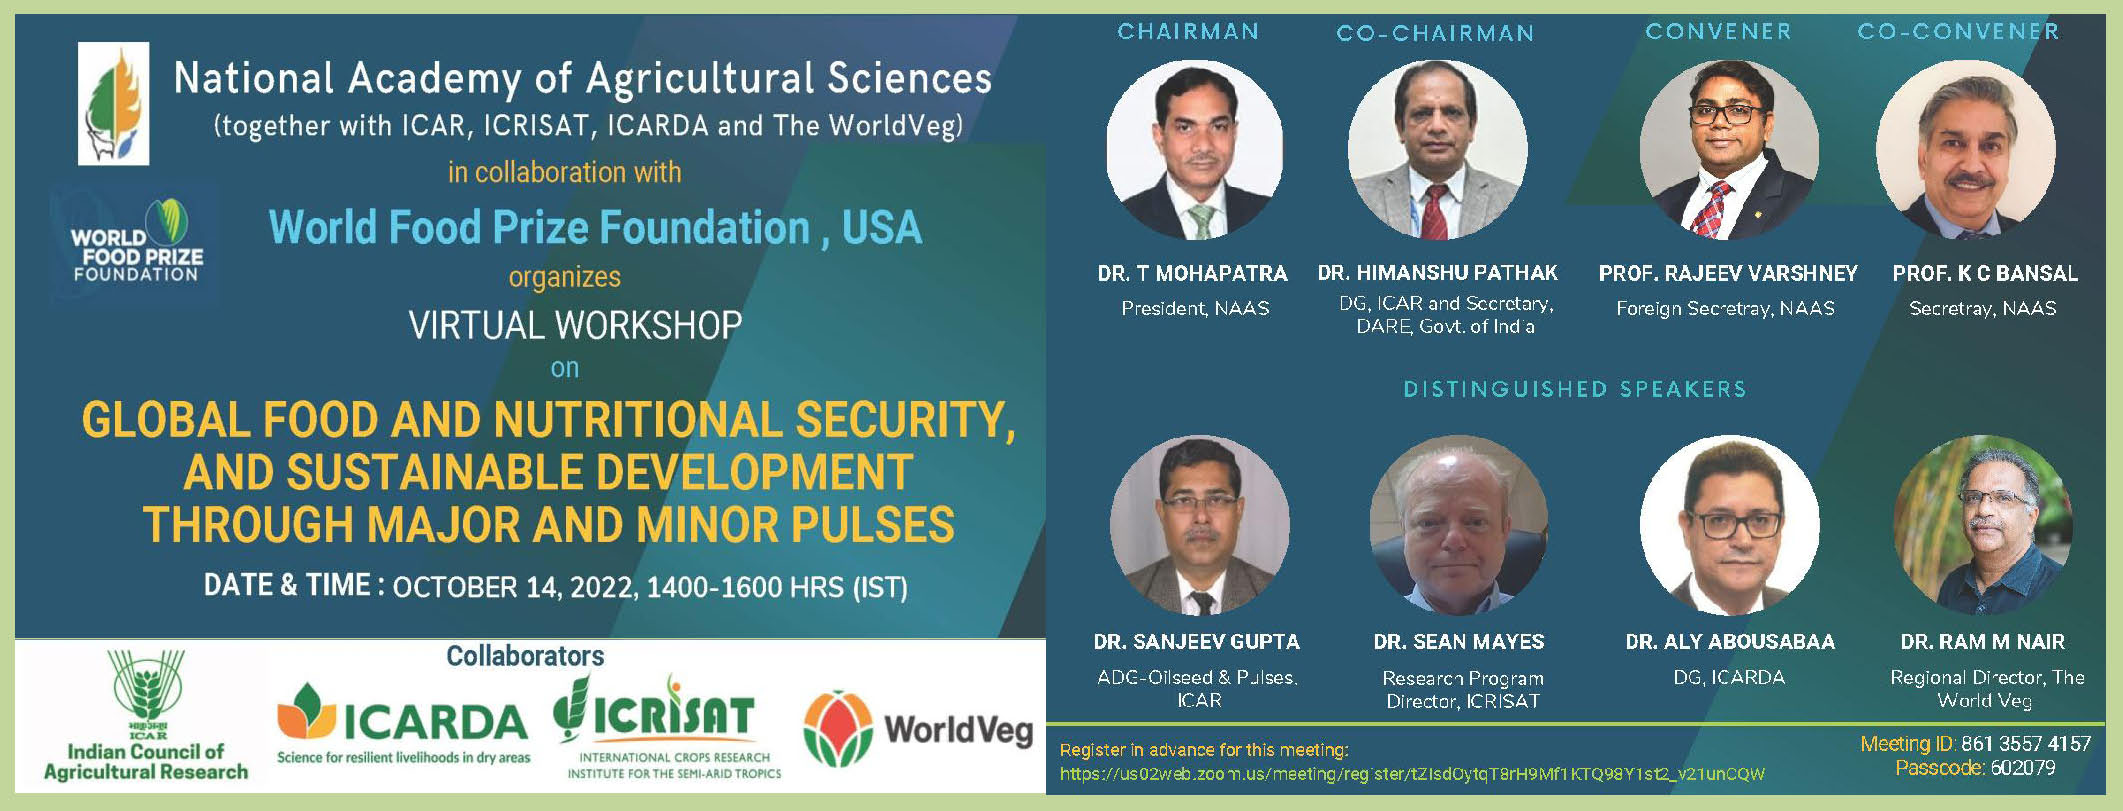 Virtual Workshop on Global Food and Nutritional Security, and Sustainable Development through Major and Minor Pulses